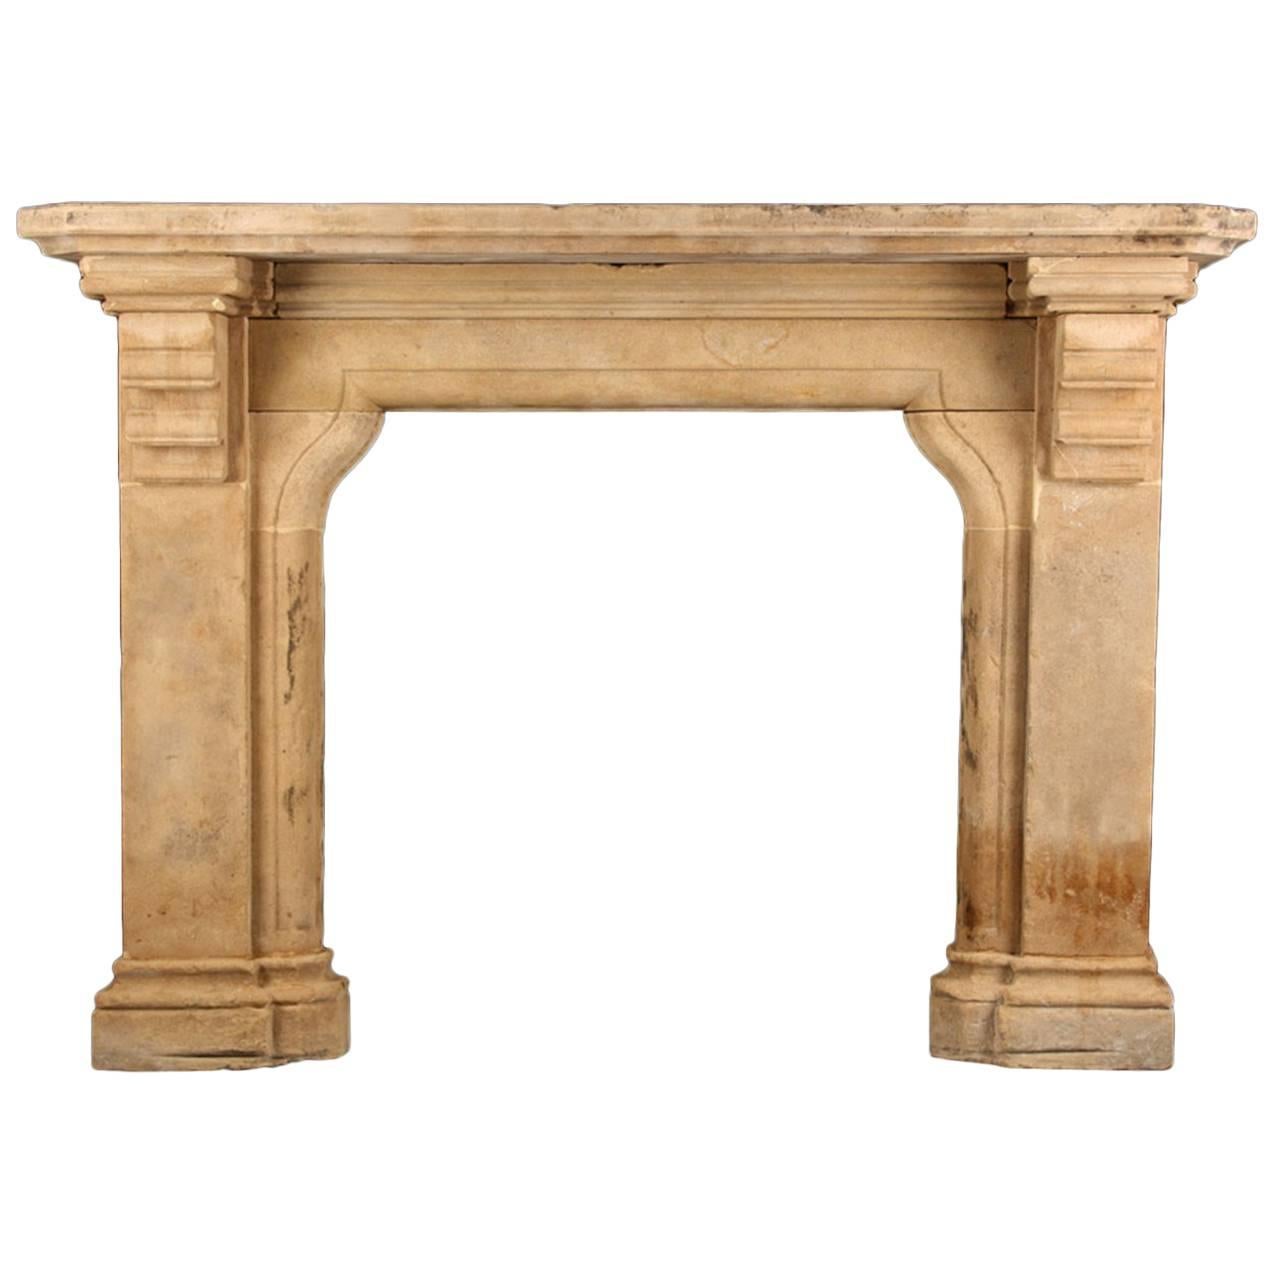 Grand Antique Gothic Tudor Revival Fireplace Mantel, English, 19th Century For Sale